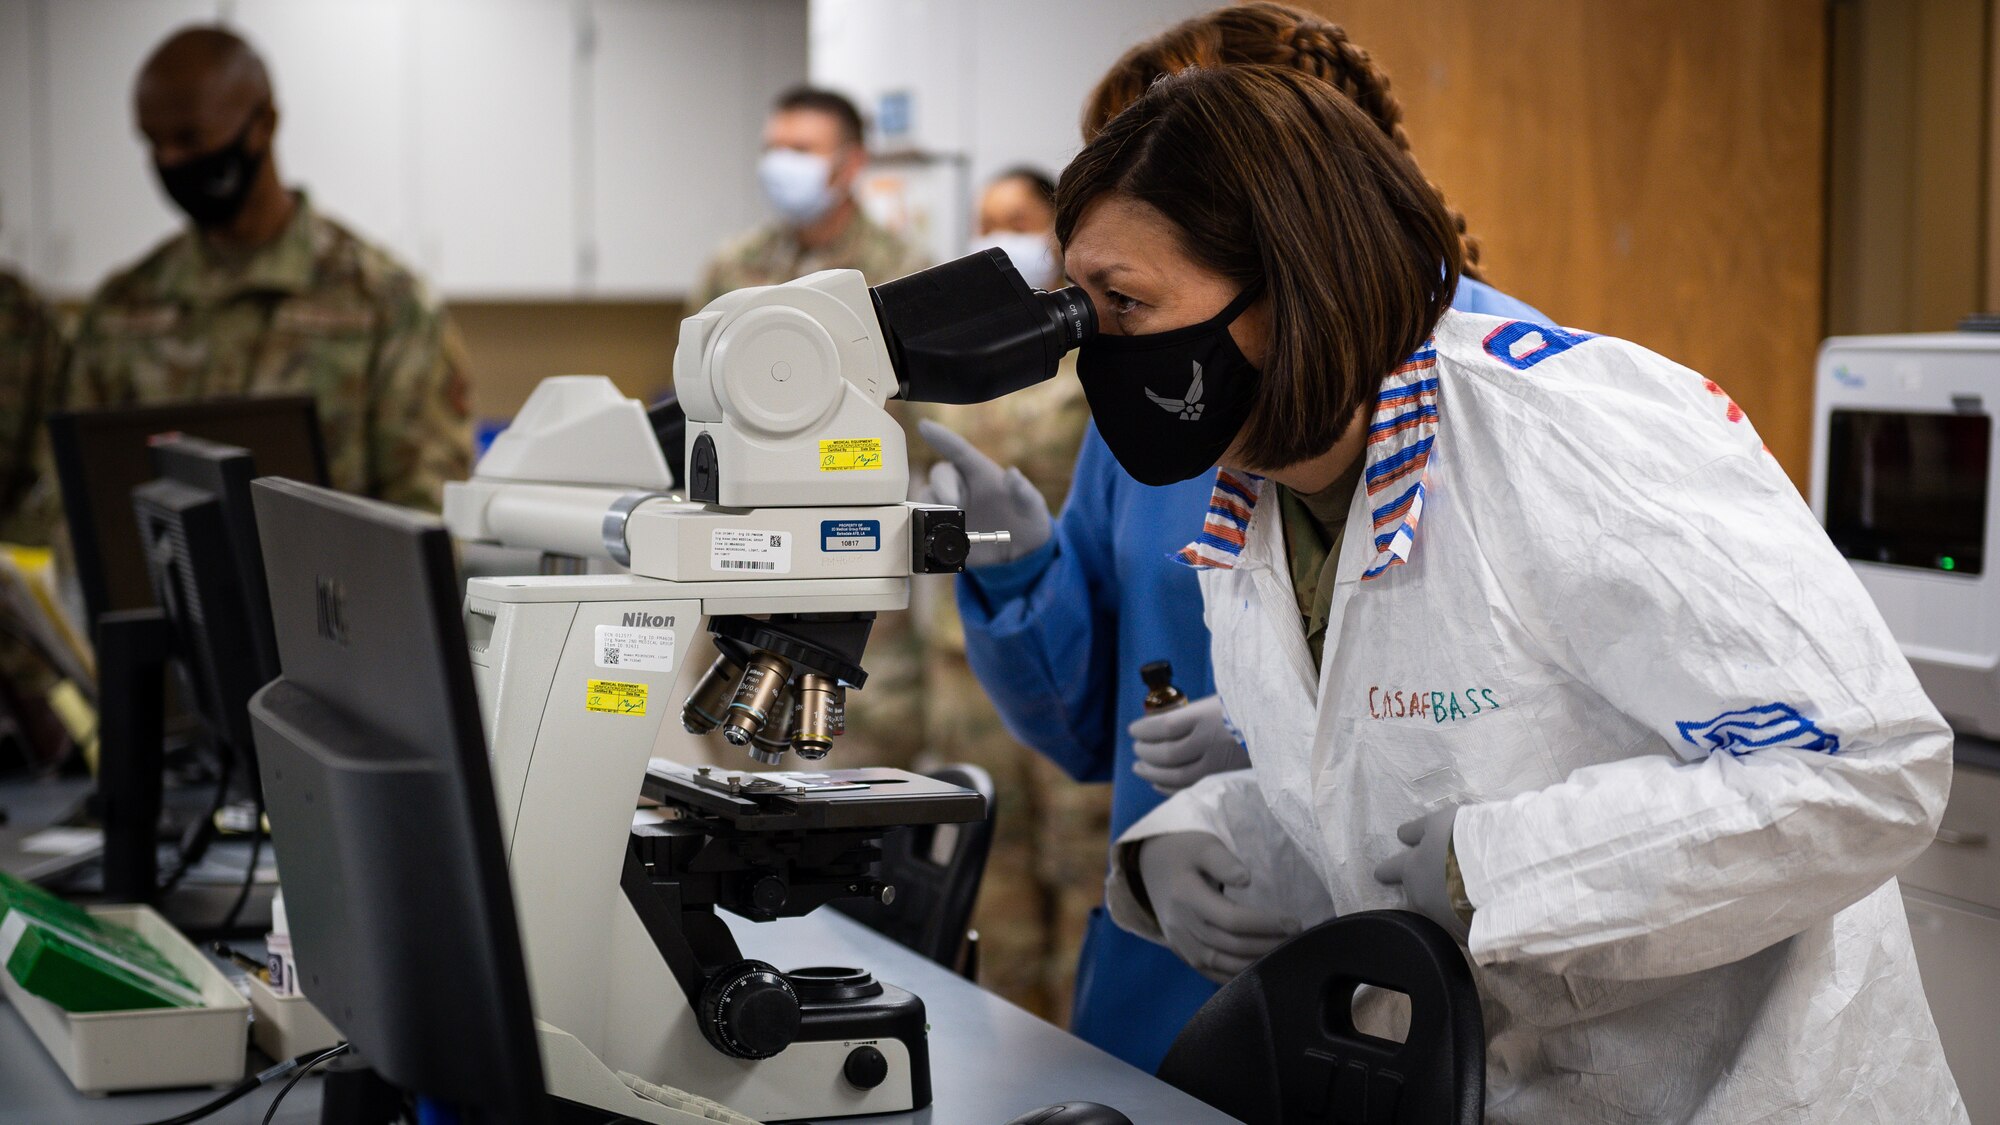 Chief Master Sergeant of the Air Force JoAnne S. Bass, looks through a microscope during a tour of Barksdale Air Force Base, Louisiana, April 21, 2021.